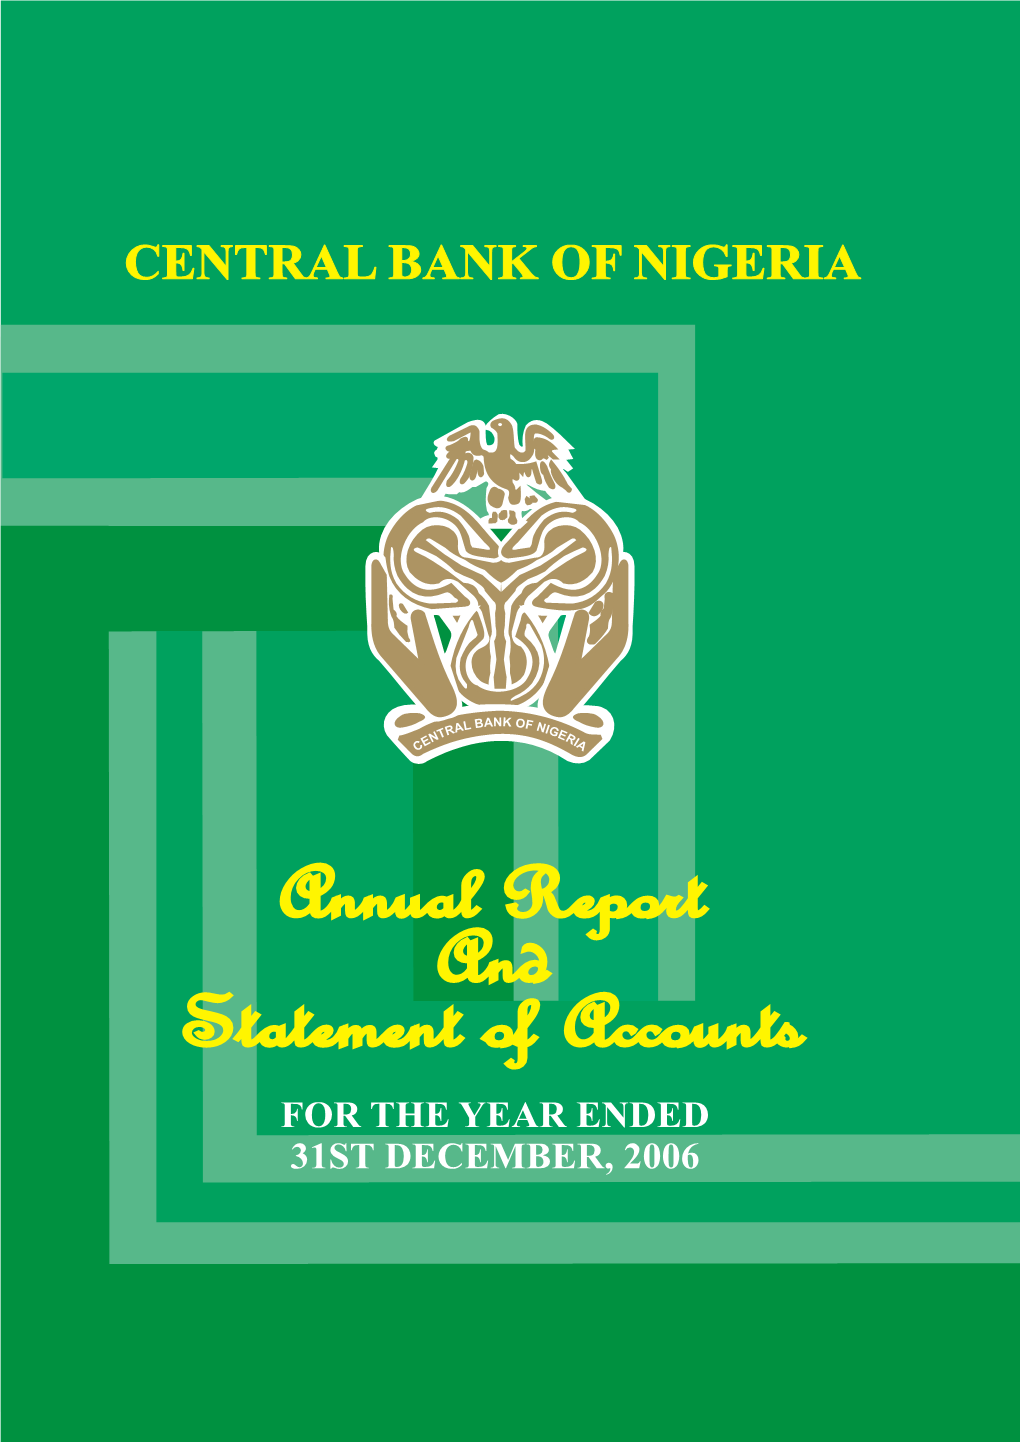 Annual Report and Statement of Accounts